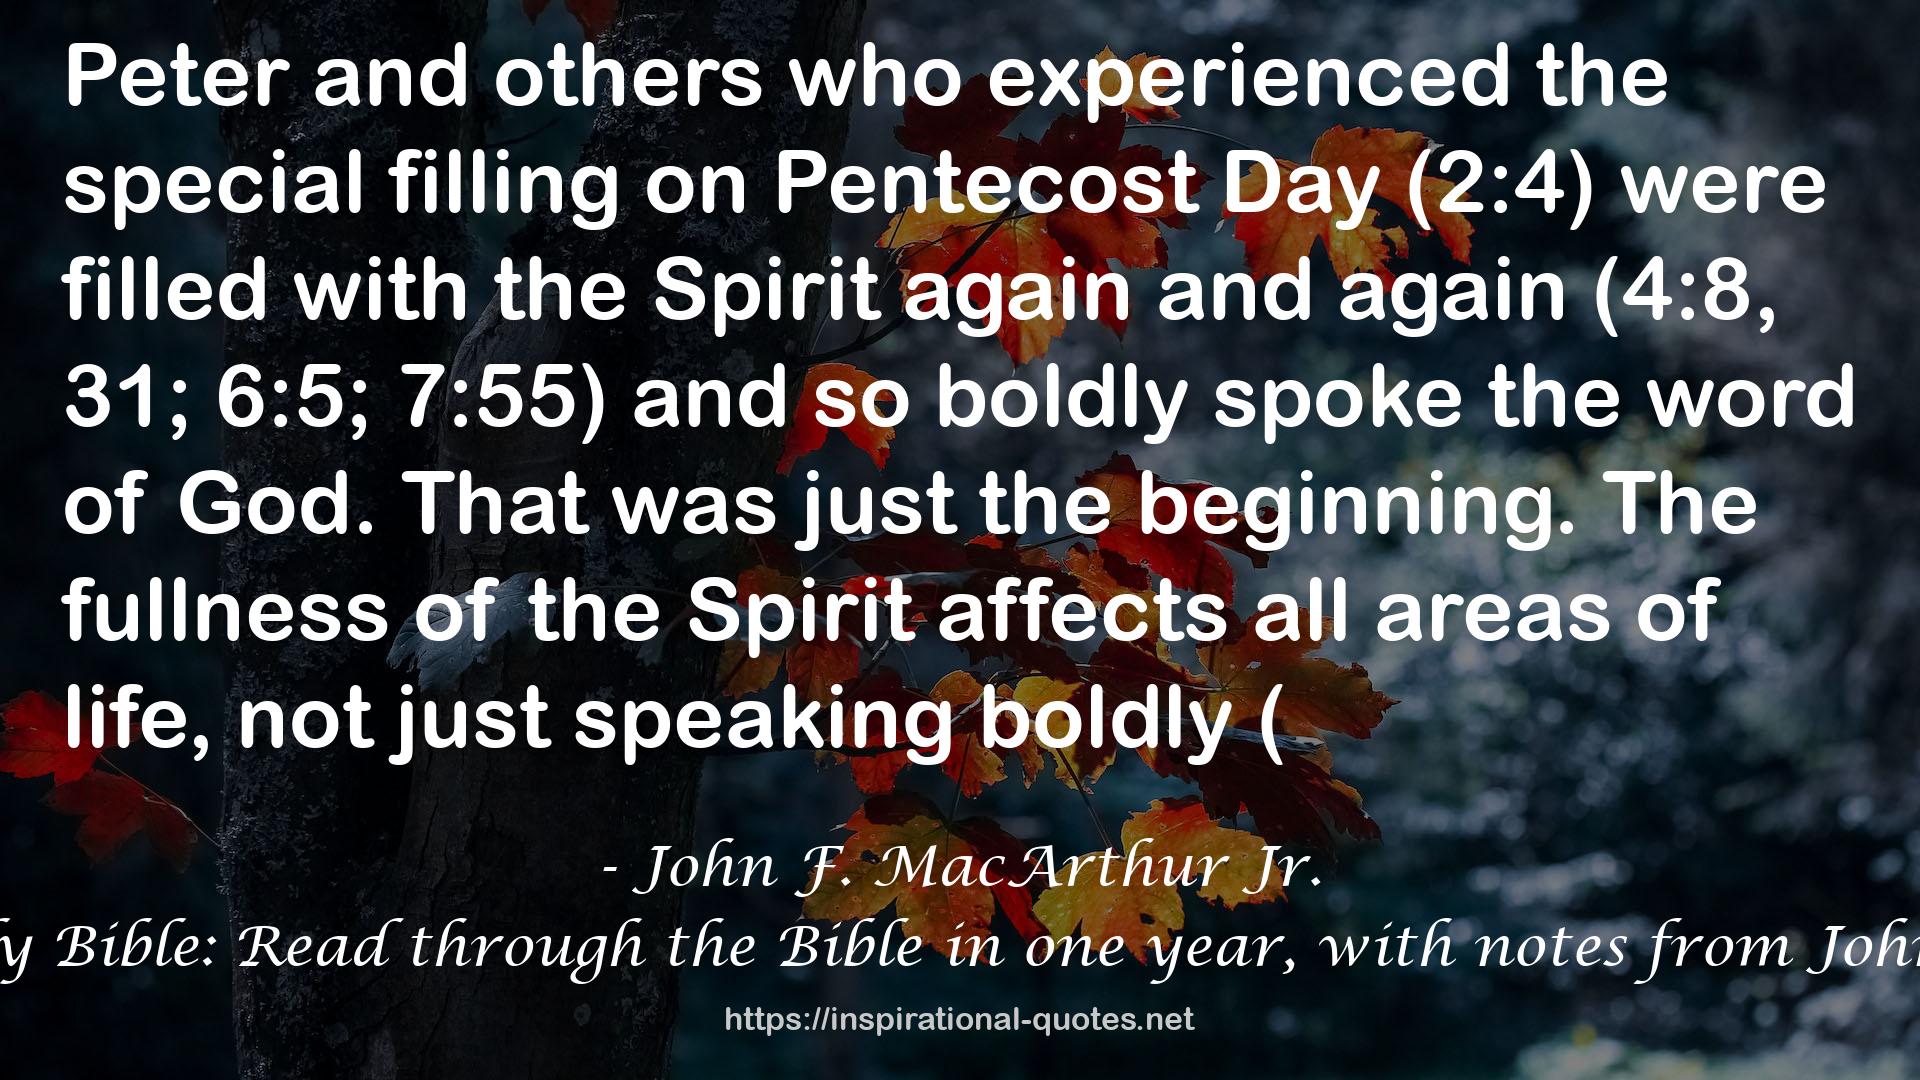 The MacArthur Daily Bible: Read through the Bible in one year, with notes from John MacArthur, NKJV QUOTES